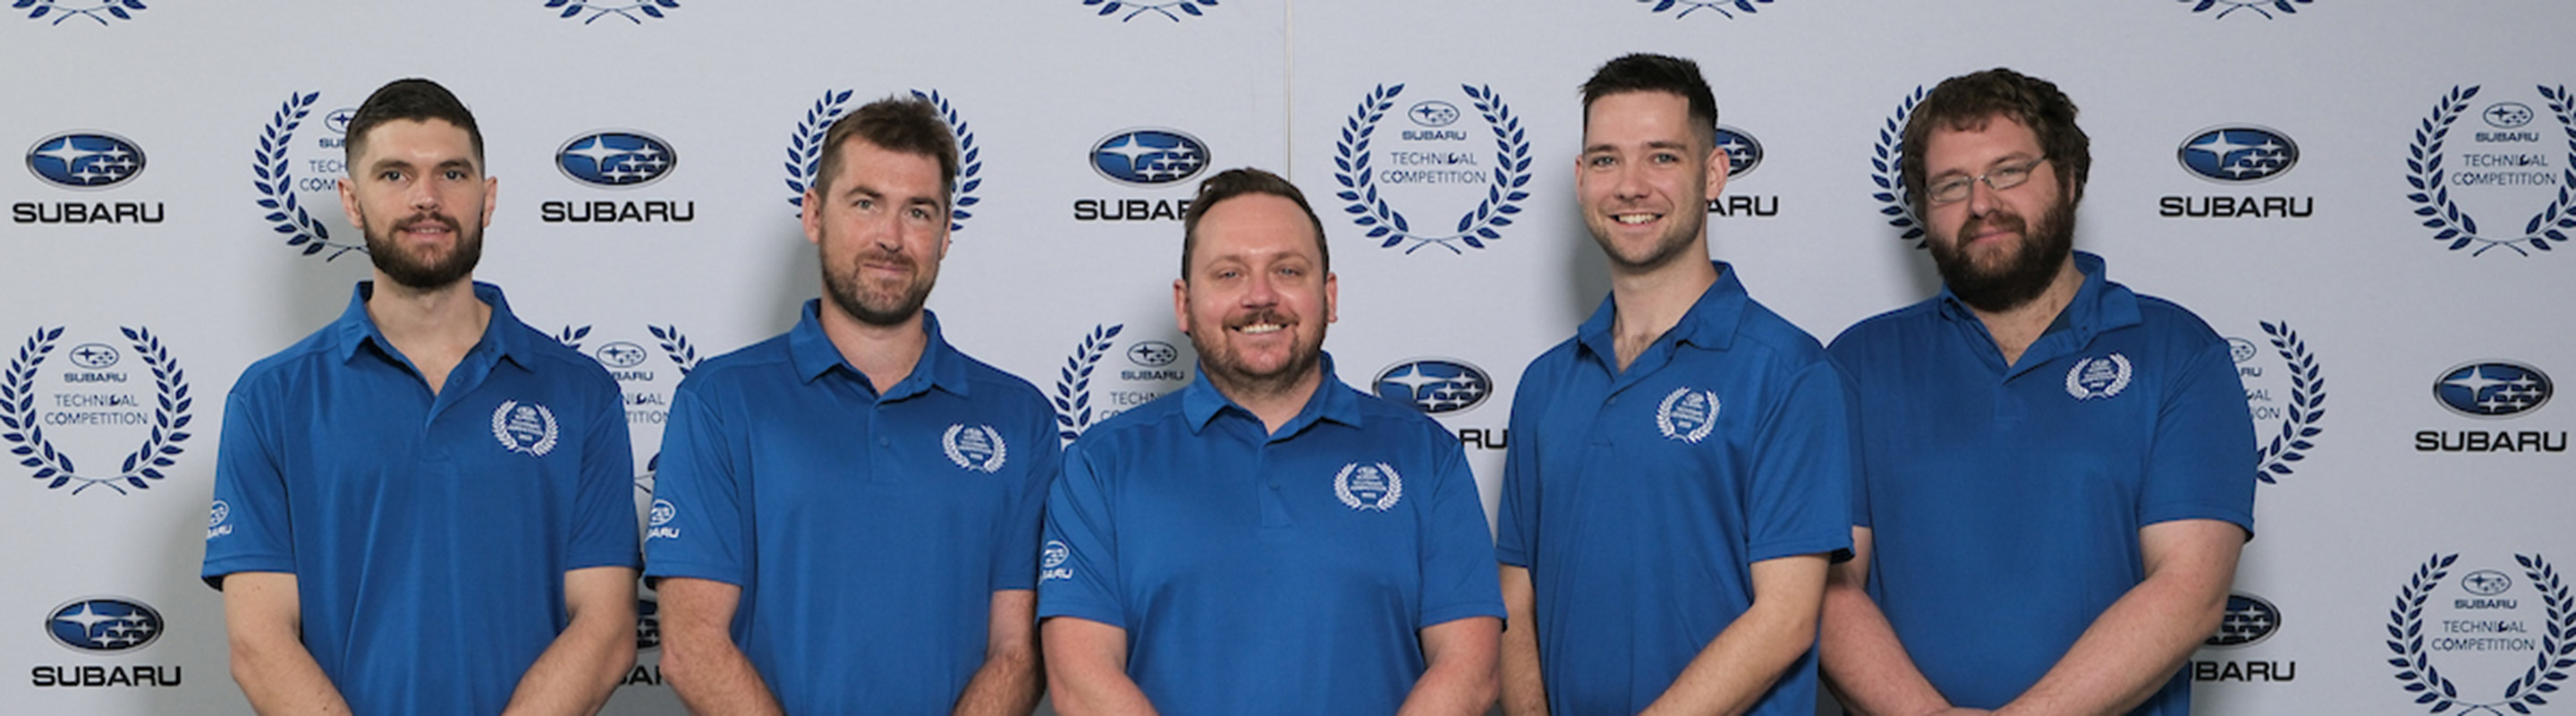 Top Subaru technician in the country selected to represent Australia on the world stage